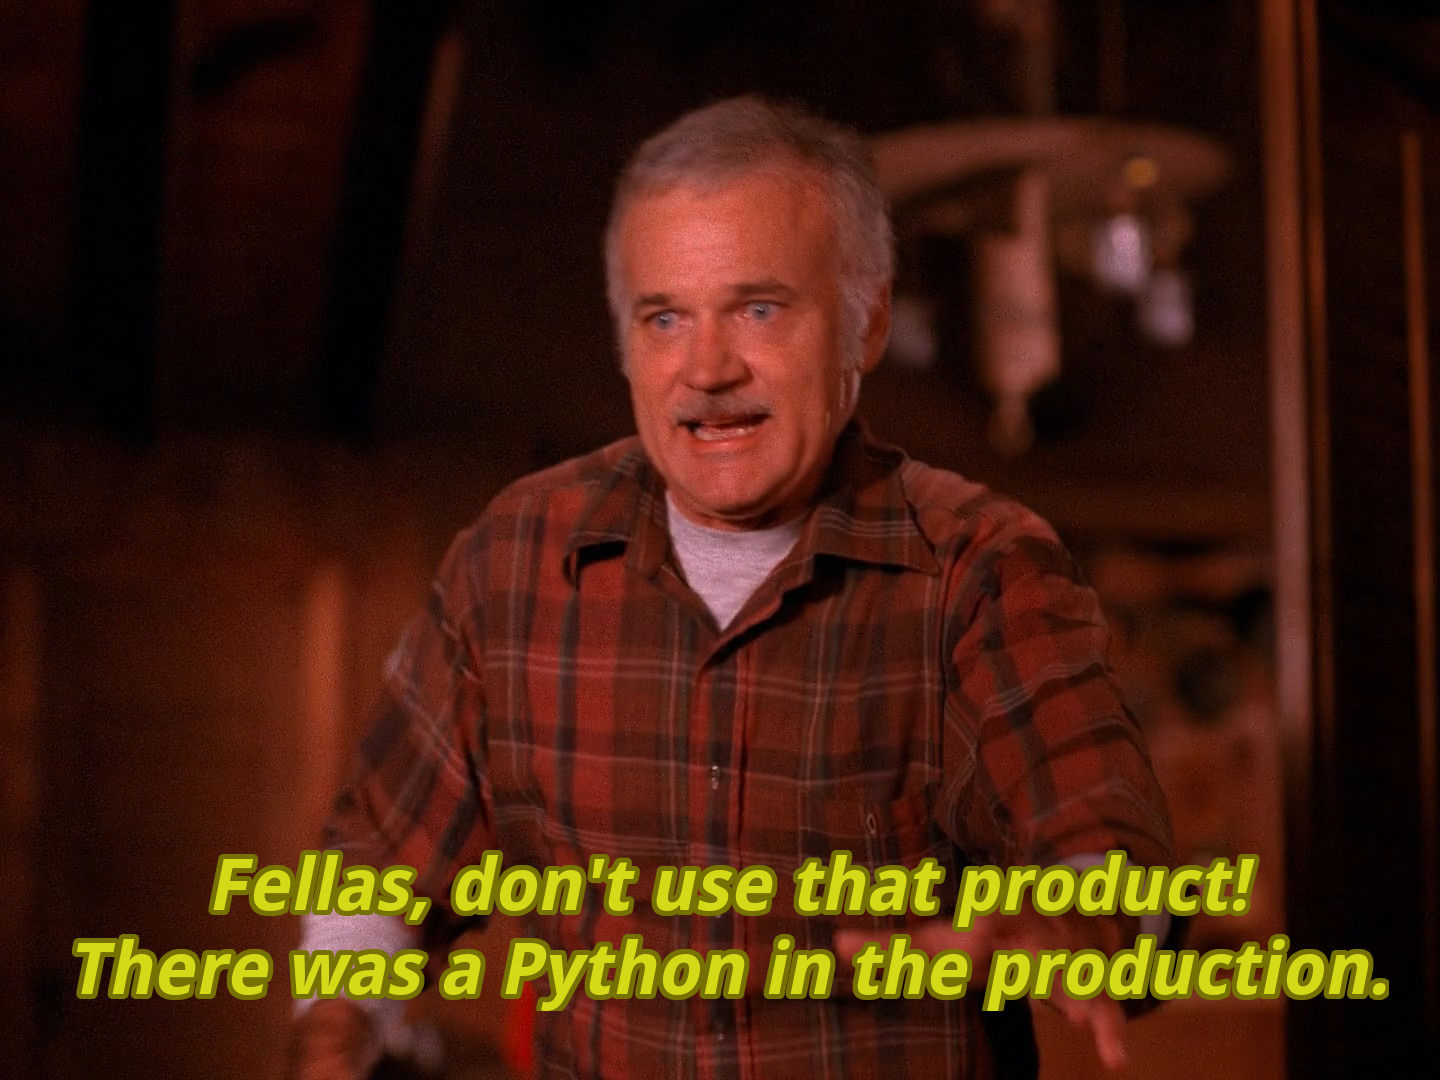 Fellas, don't use that product! There was a Python in the production